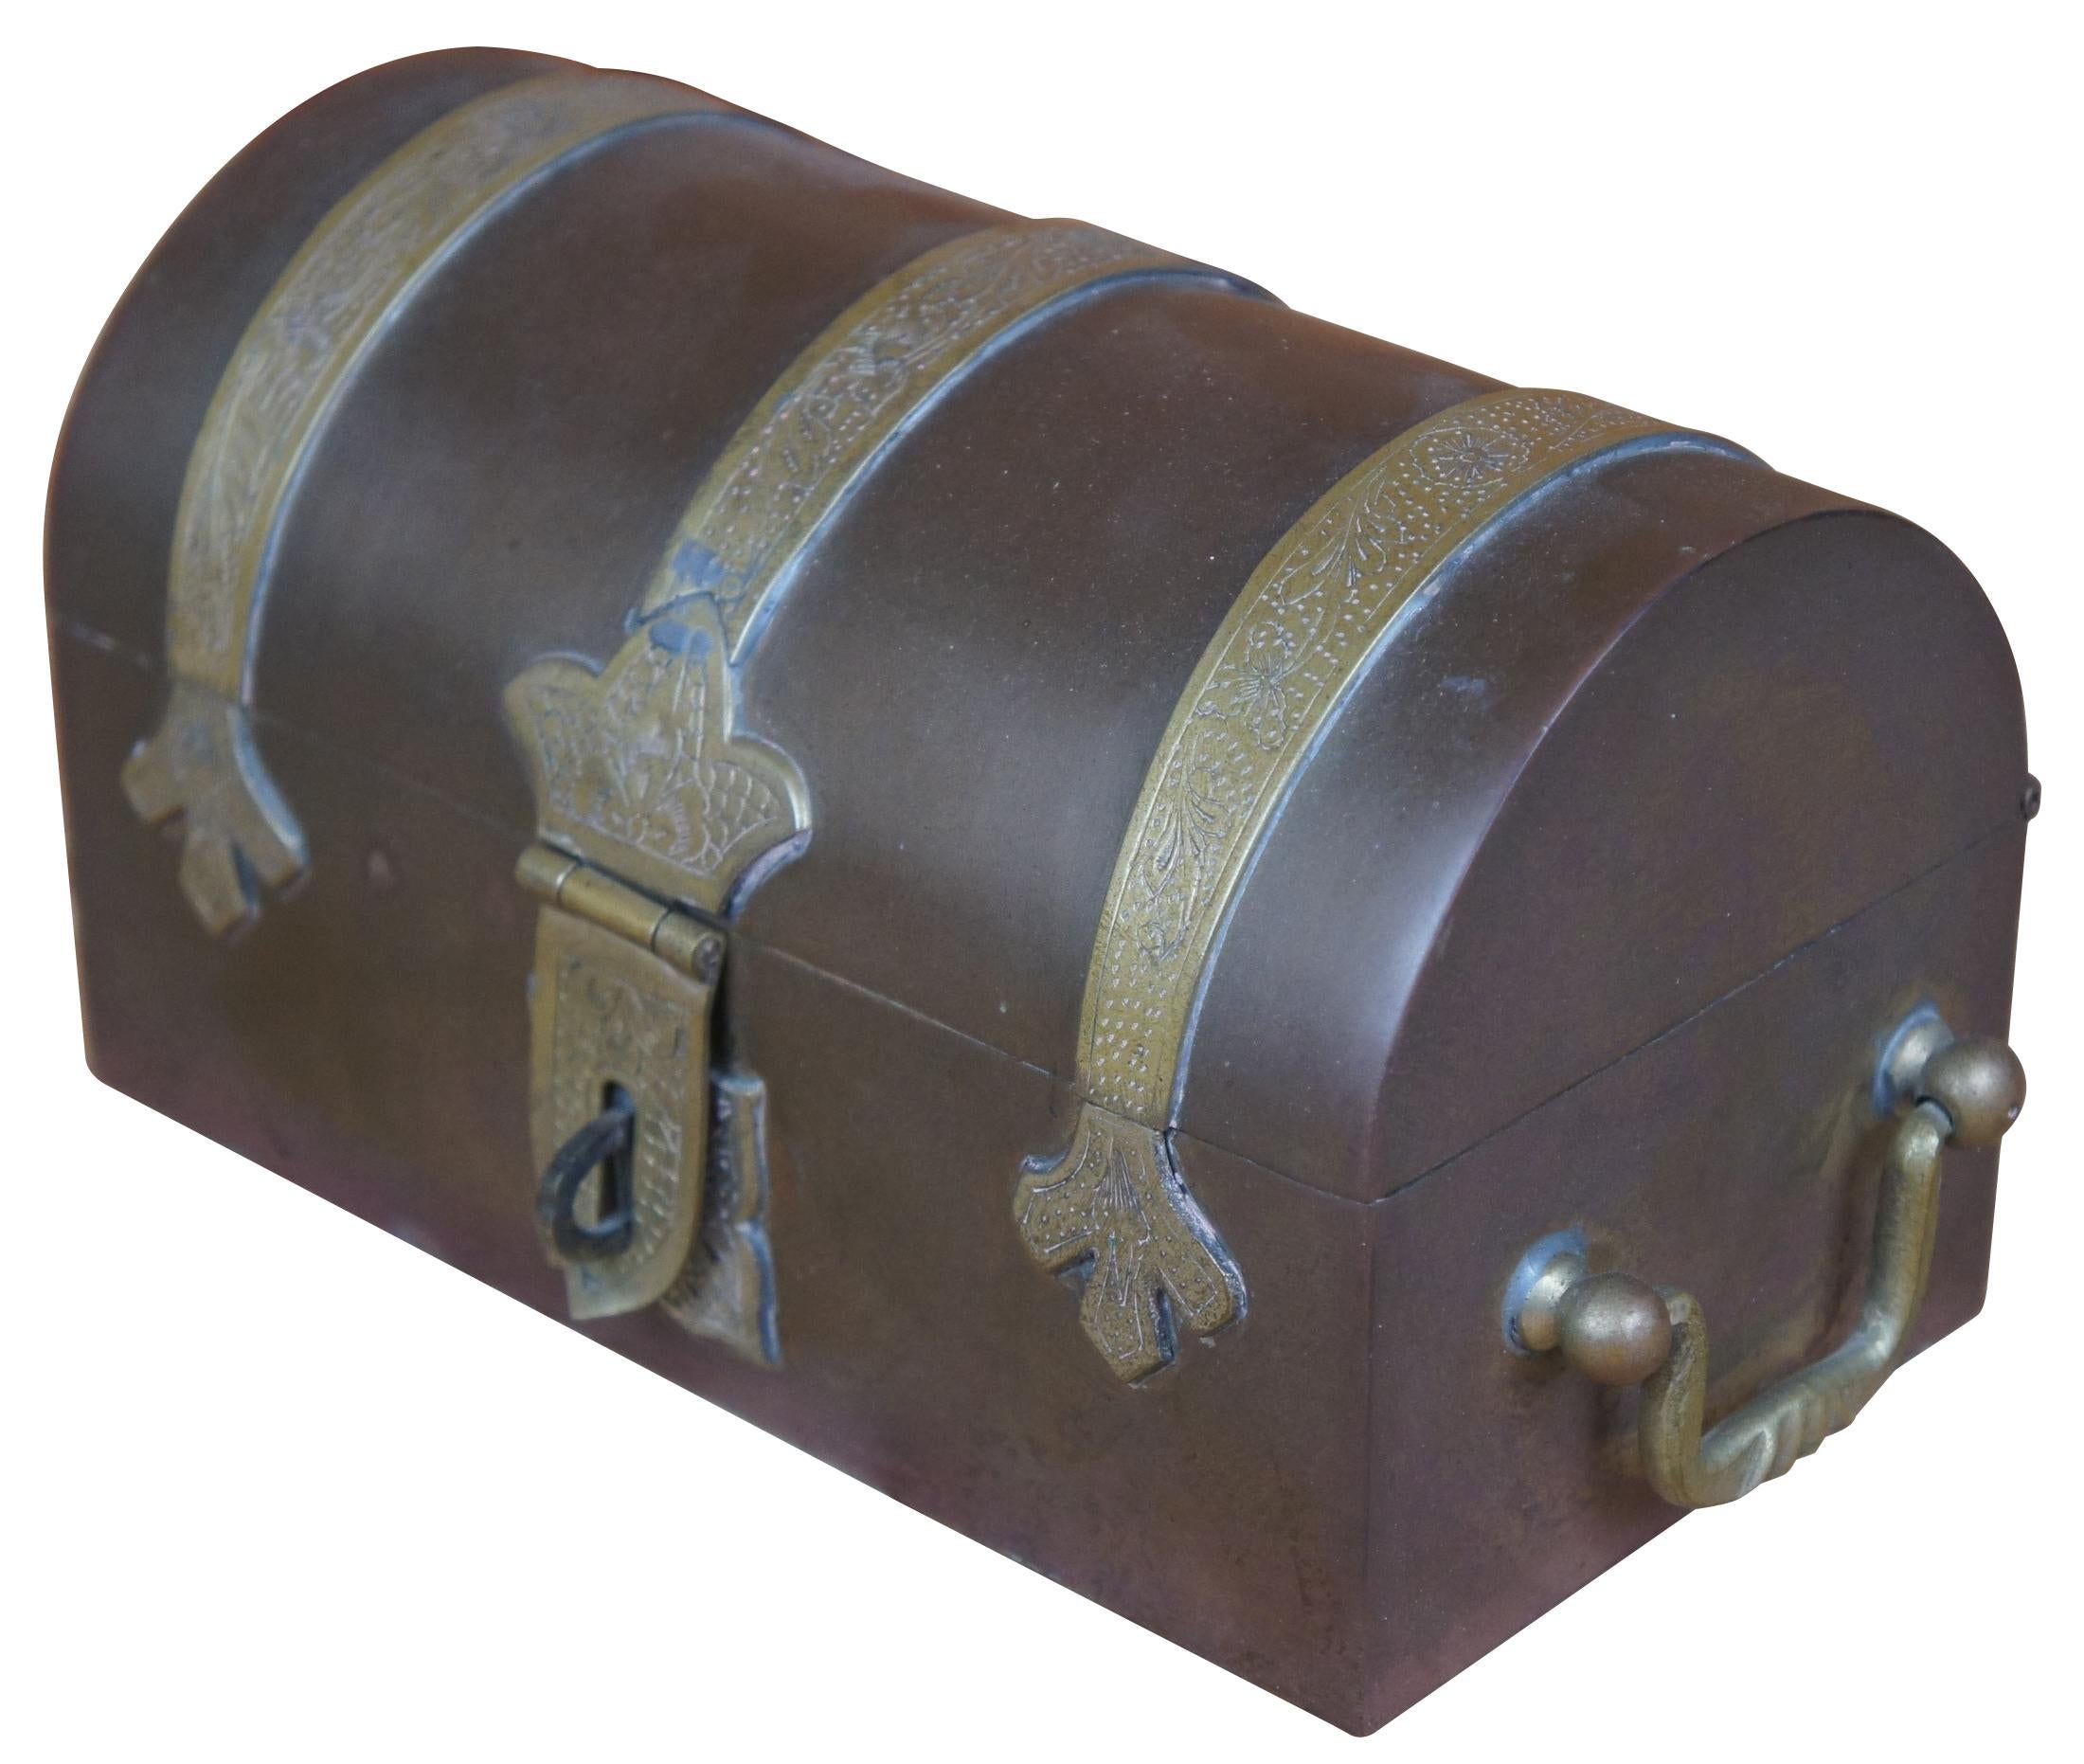 Antique English copper and brass banded domed keepsake / storage / jewelry / dowry / wedding or letter box shaped like a treasure chest or trunk with handles and latch. Size: 7